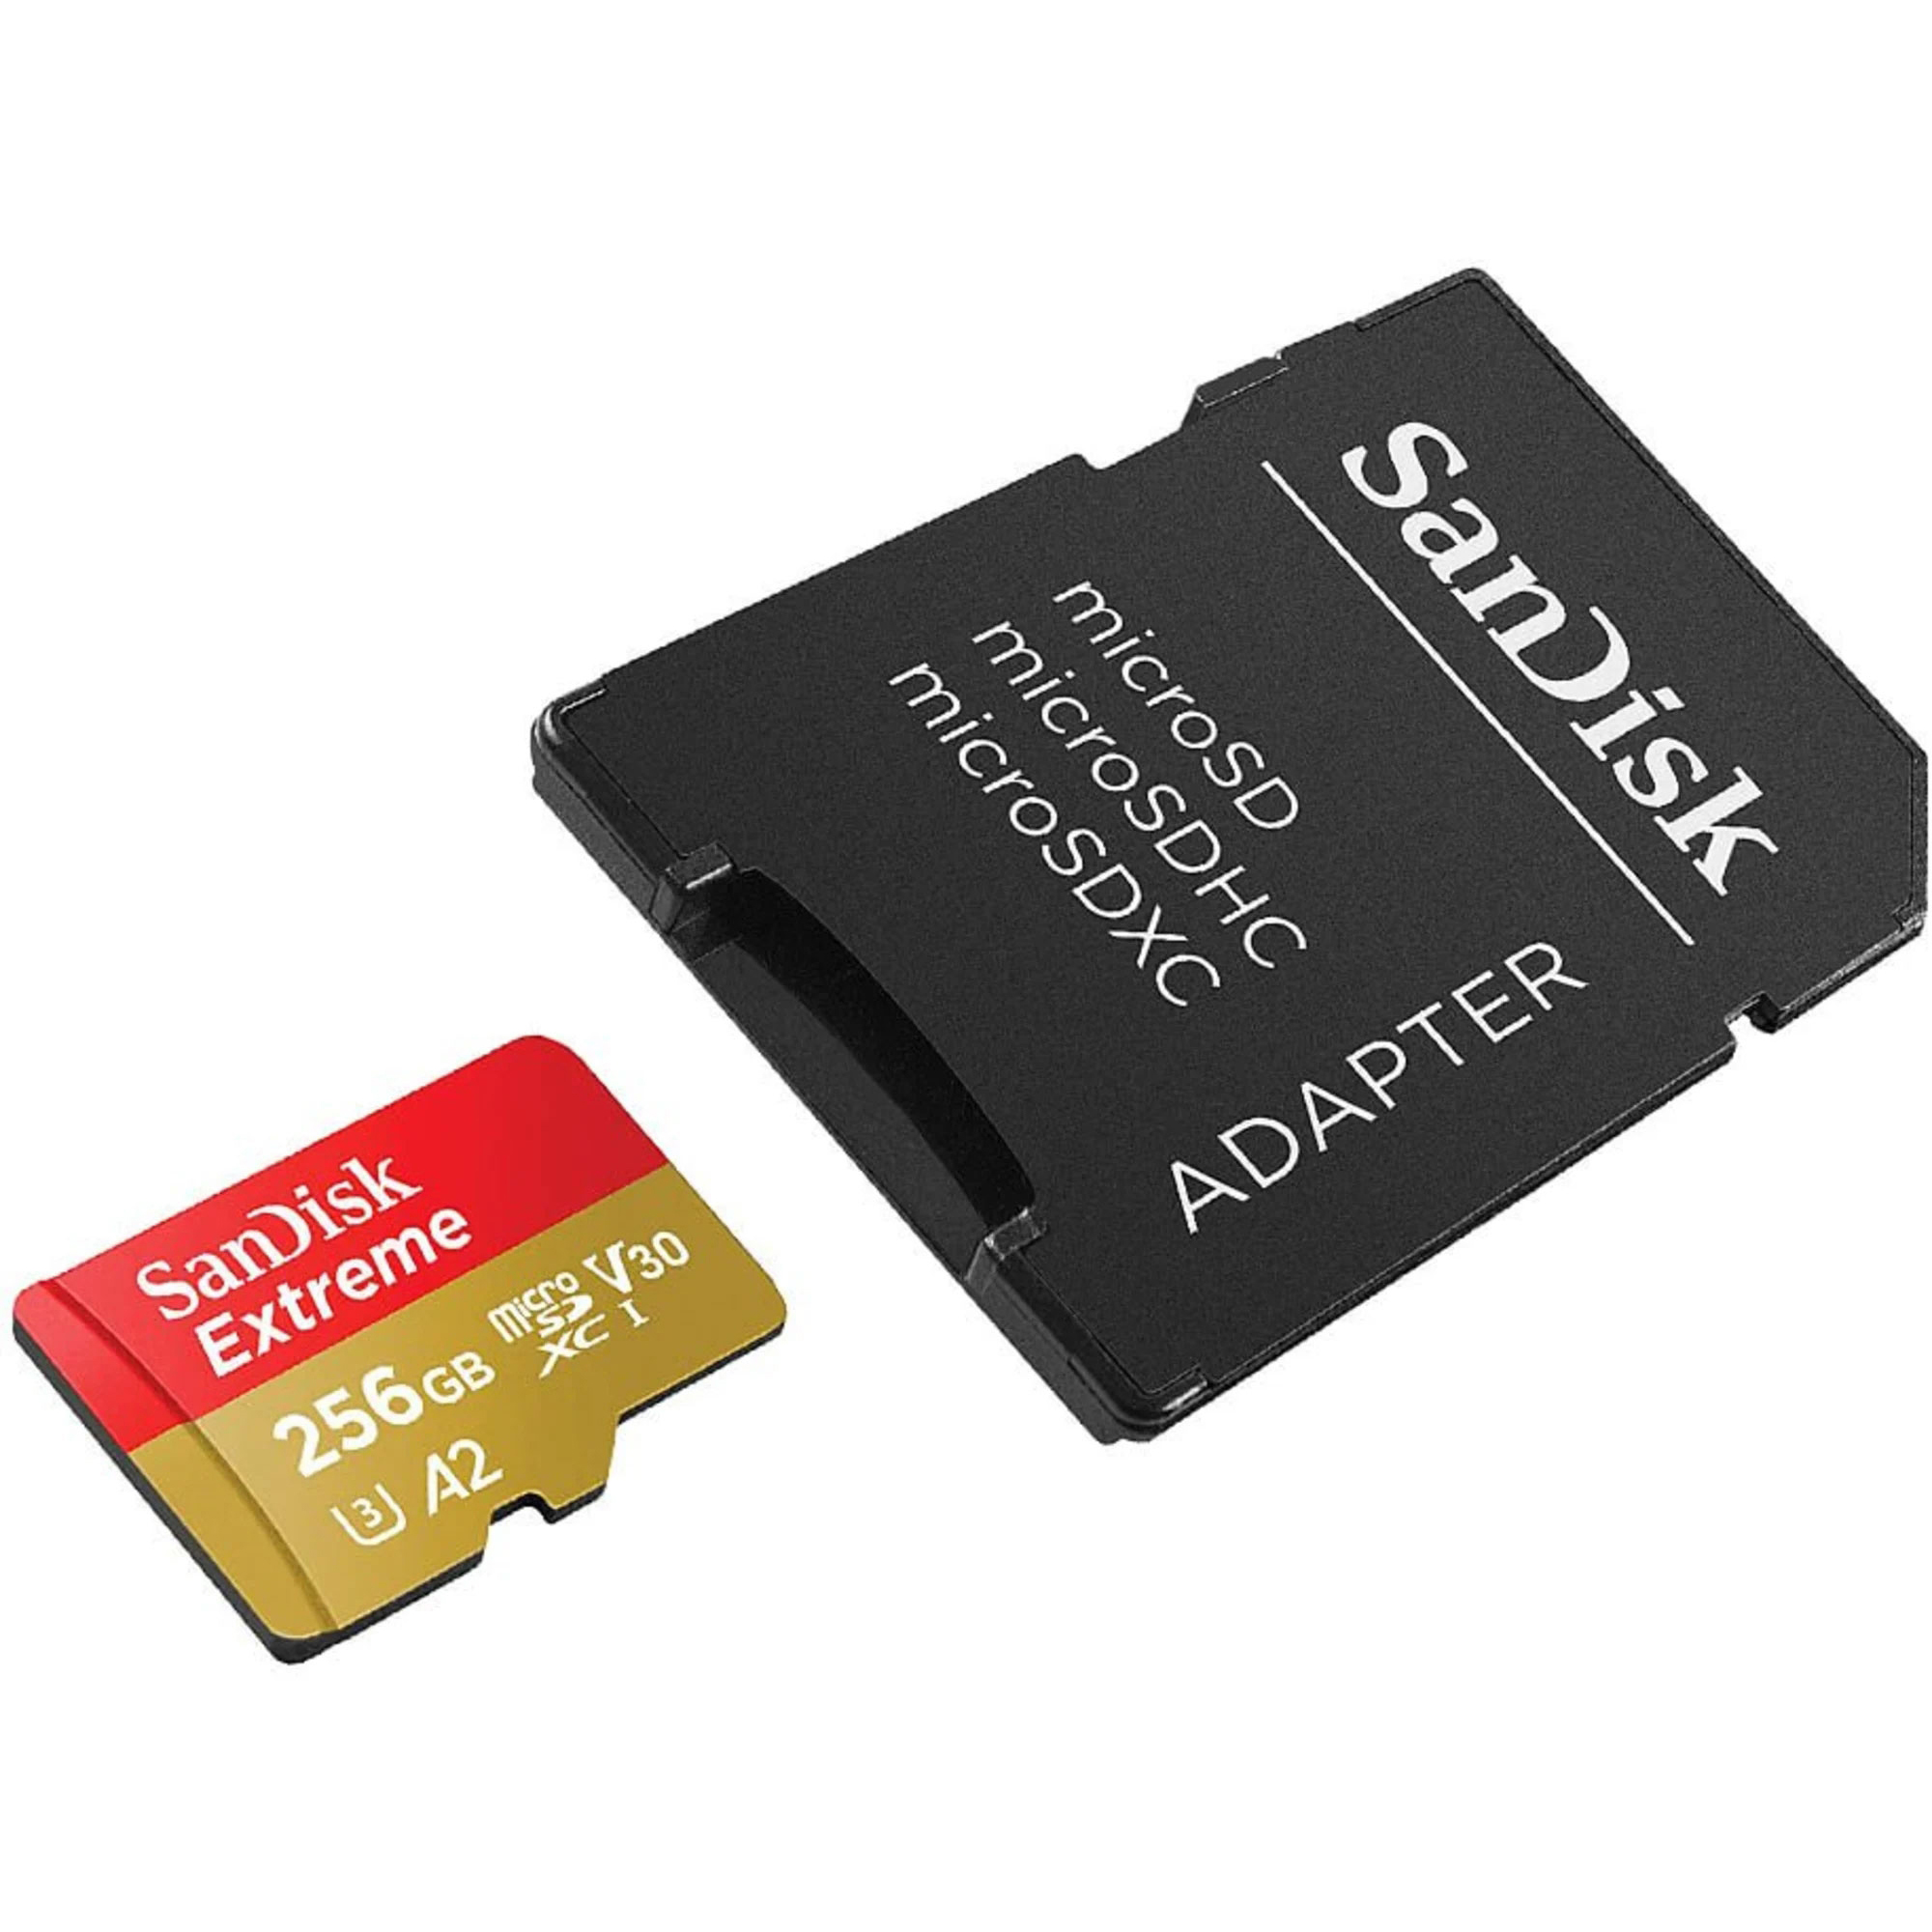 Original Sandisk Extreme Plus 256Gb Microsdxc Memory Card And Adapter (SDSQXBD-256G-GN6MA)